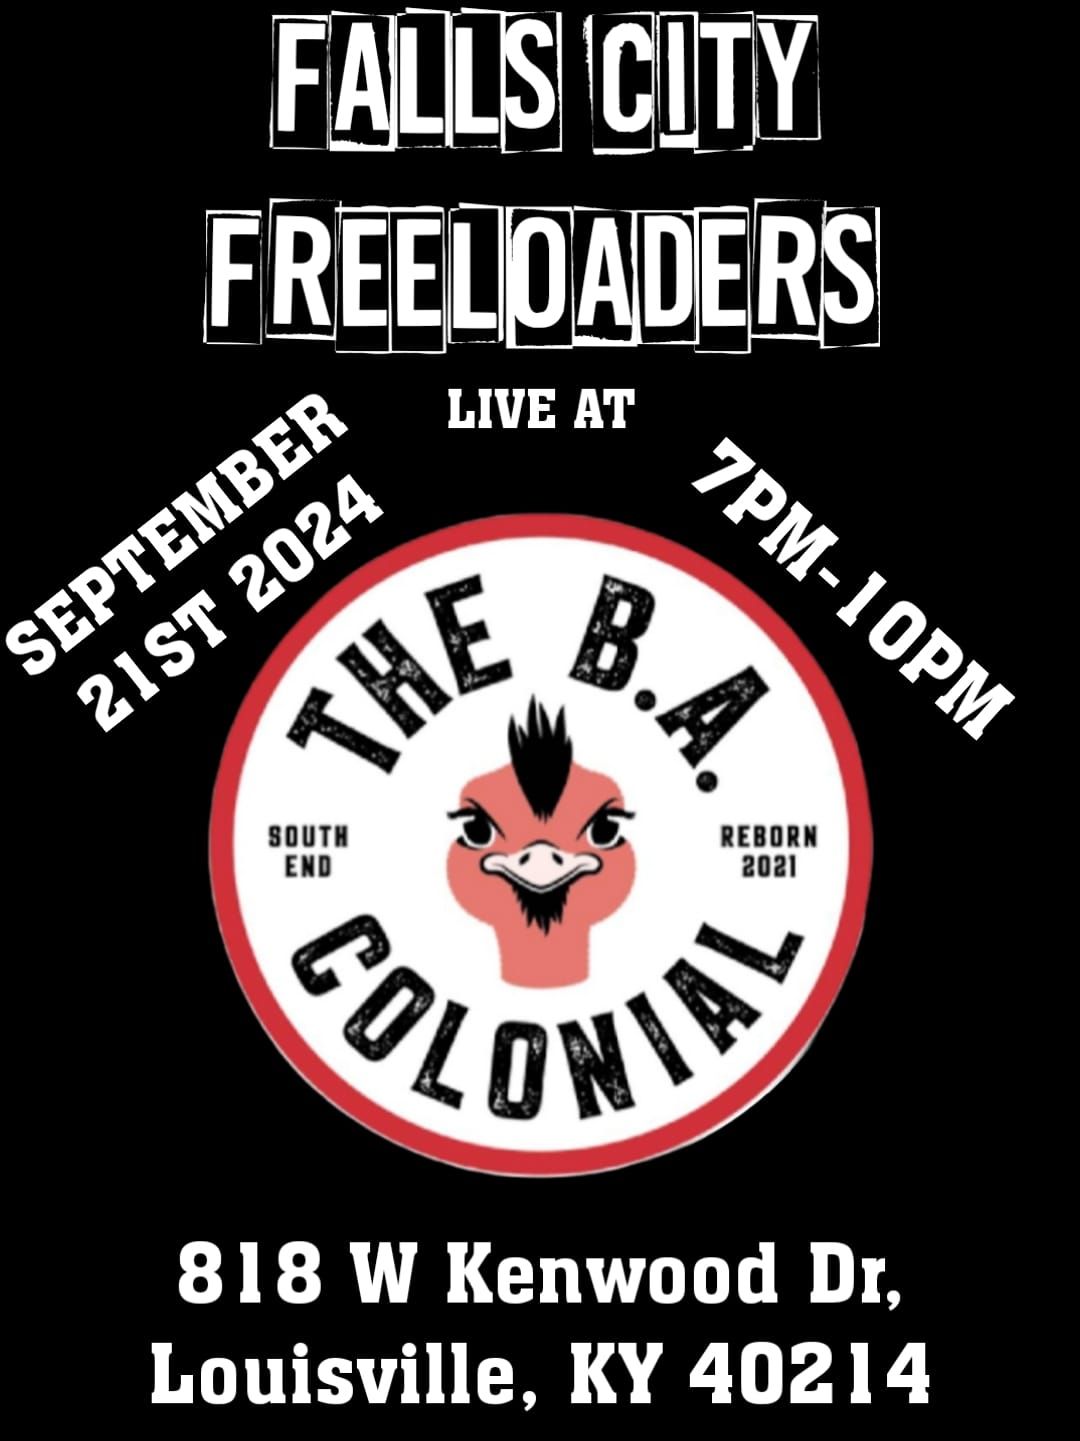 FALLS CITY FREELOADERS LIVE AT THE B.A COLONIAL